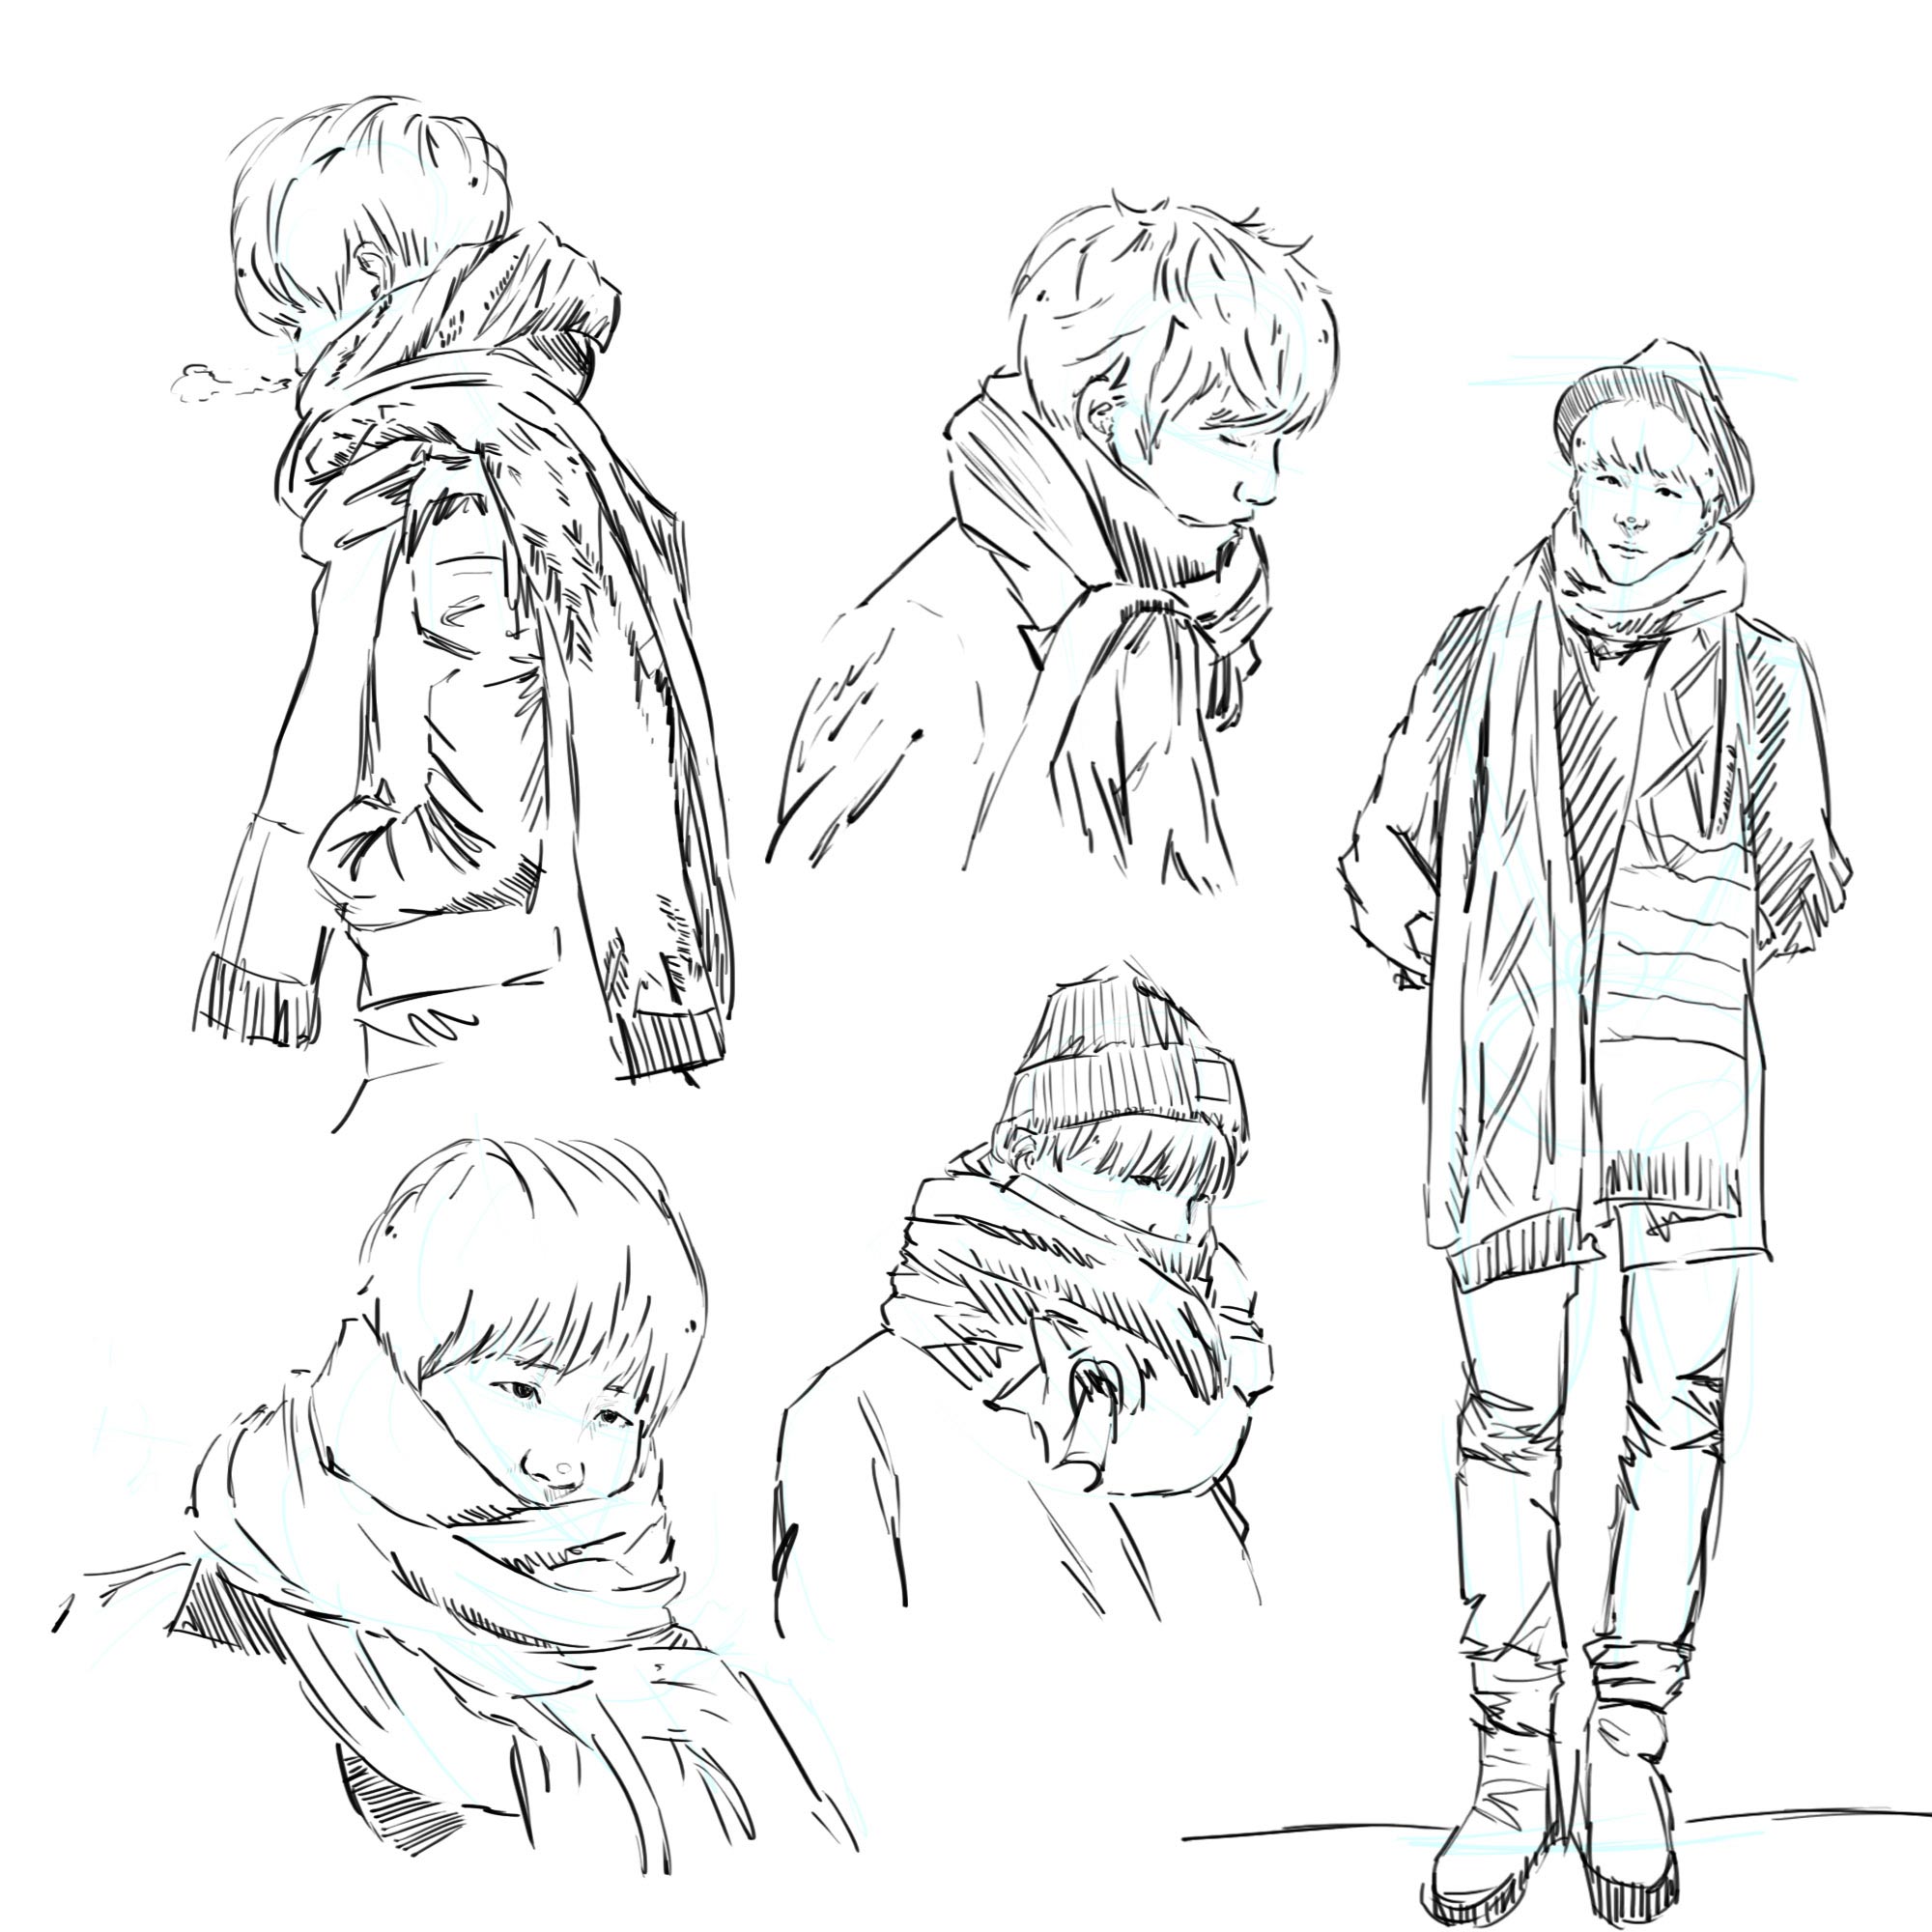 scarf drawing reference